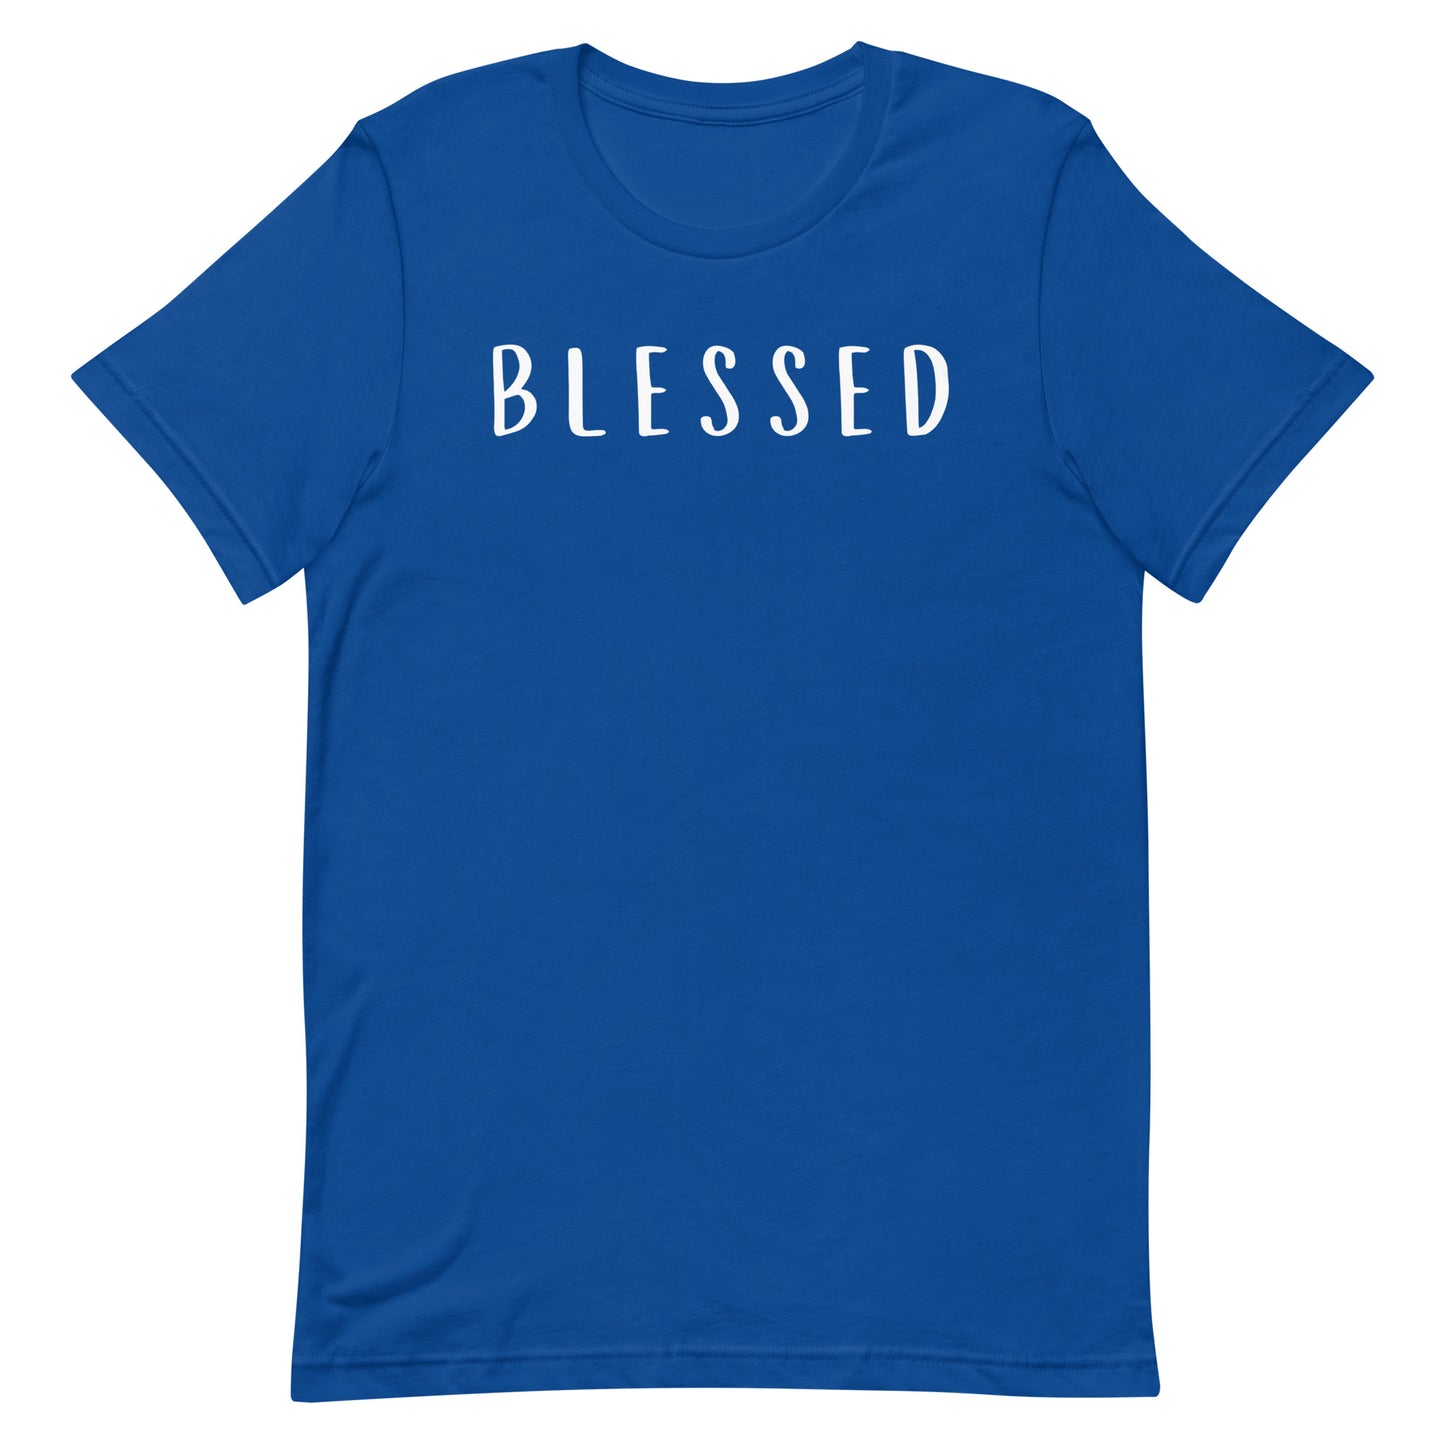 Blessed. Inspirational T-shirt.